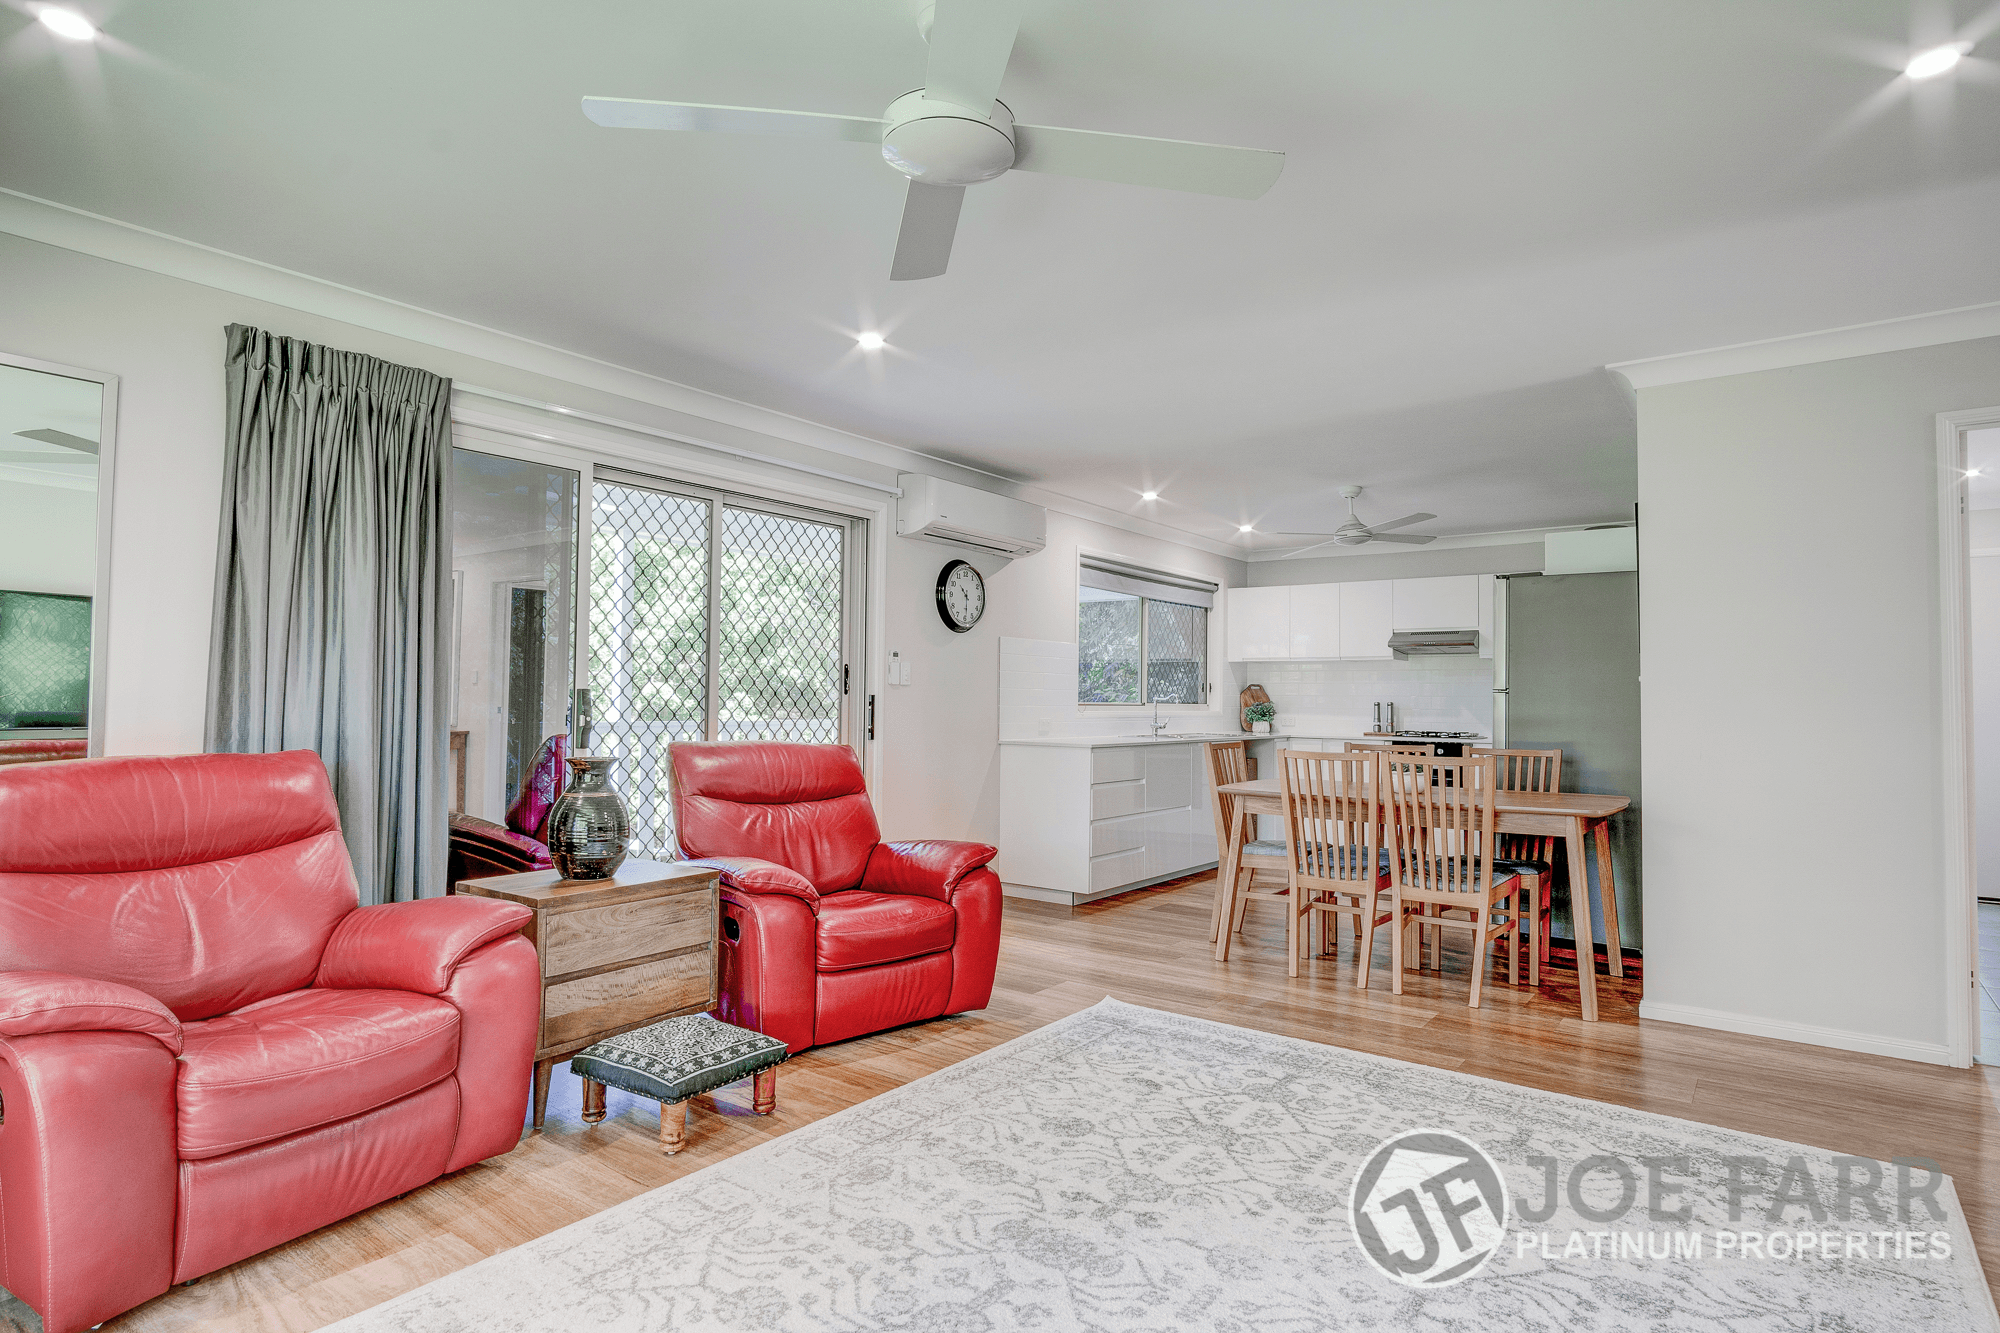 5-7 Plover Court, WONGLEPONG, QLD 4275